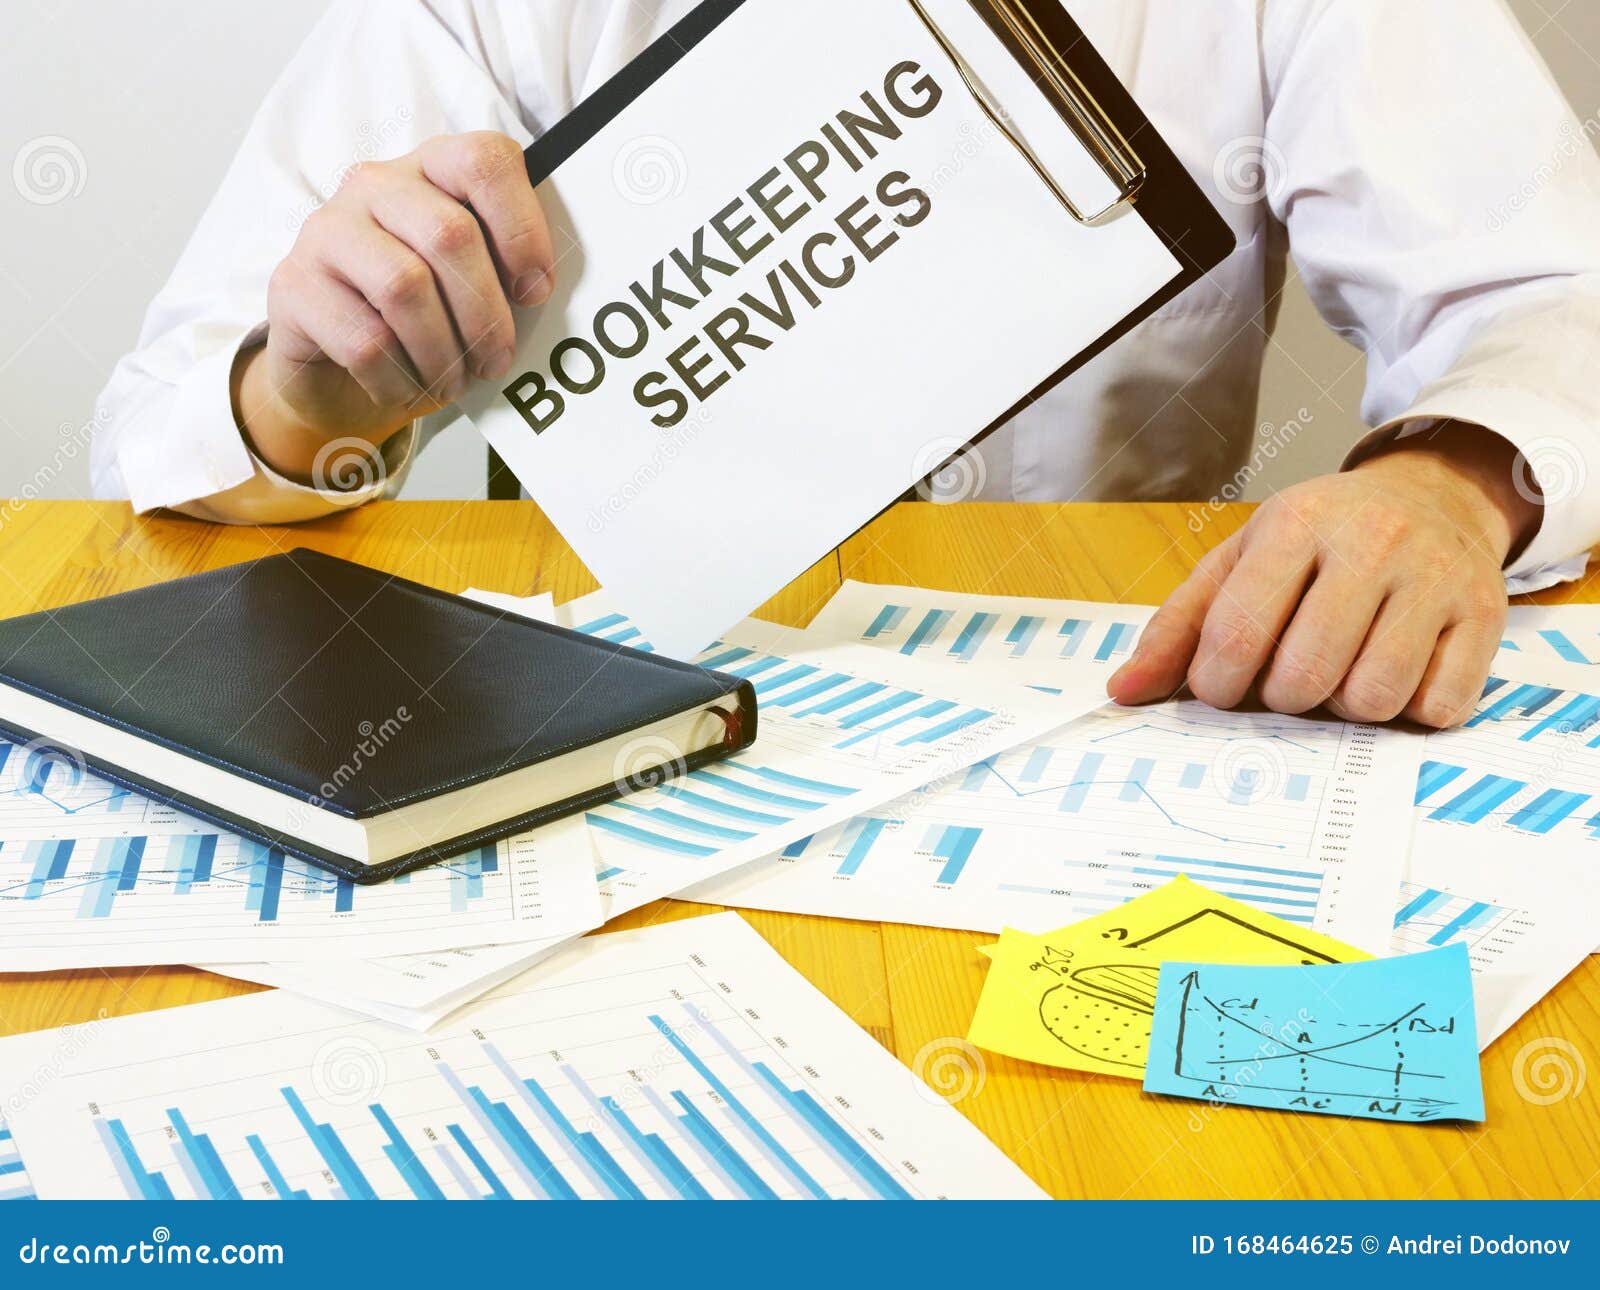 writing note shows the text bookkeeping services